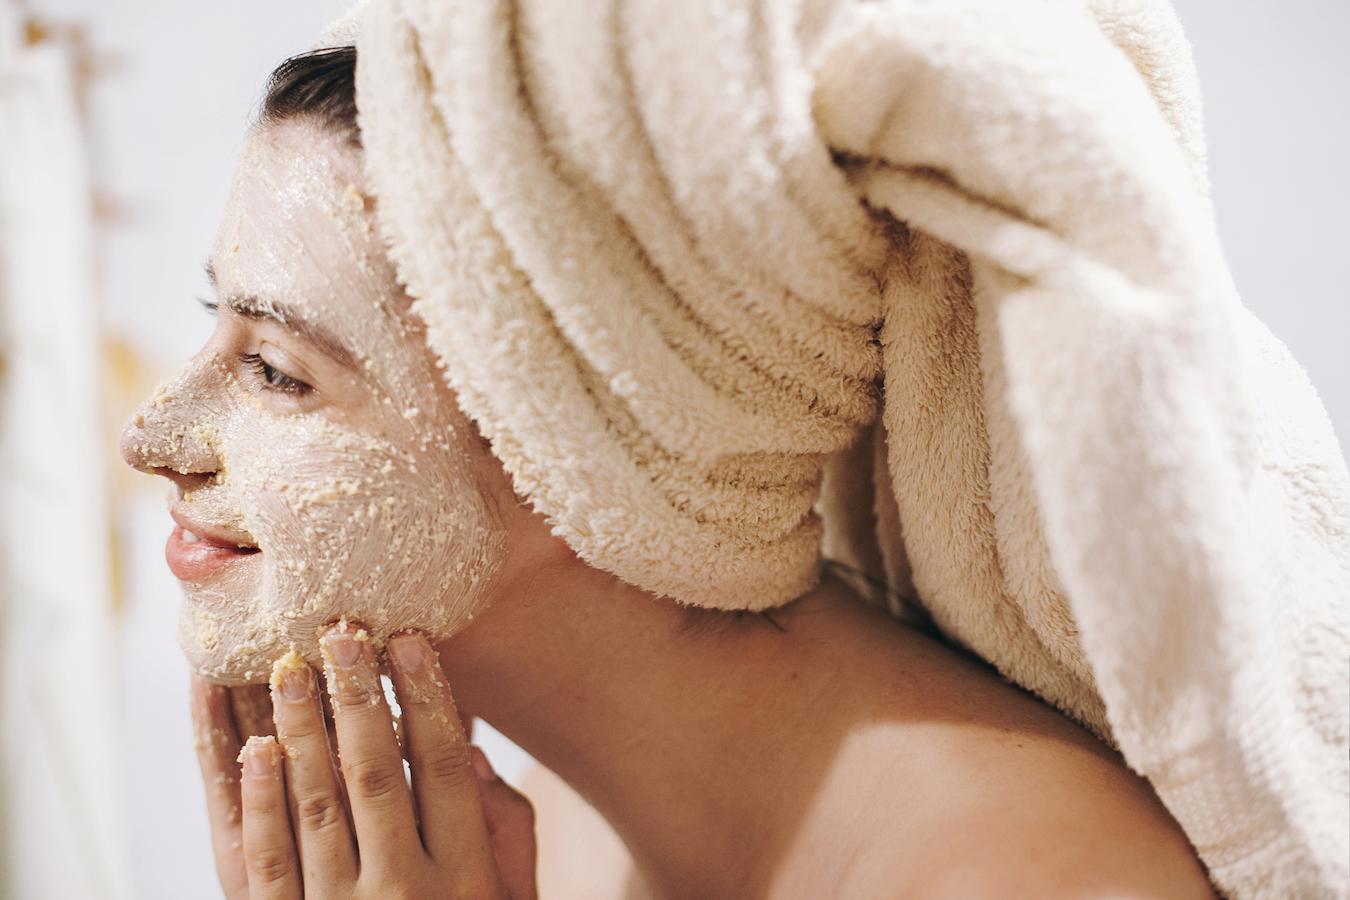 girl with a towel on her head applying a face scrub vitamin c serum layer skincare products applying skincare skin care products